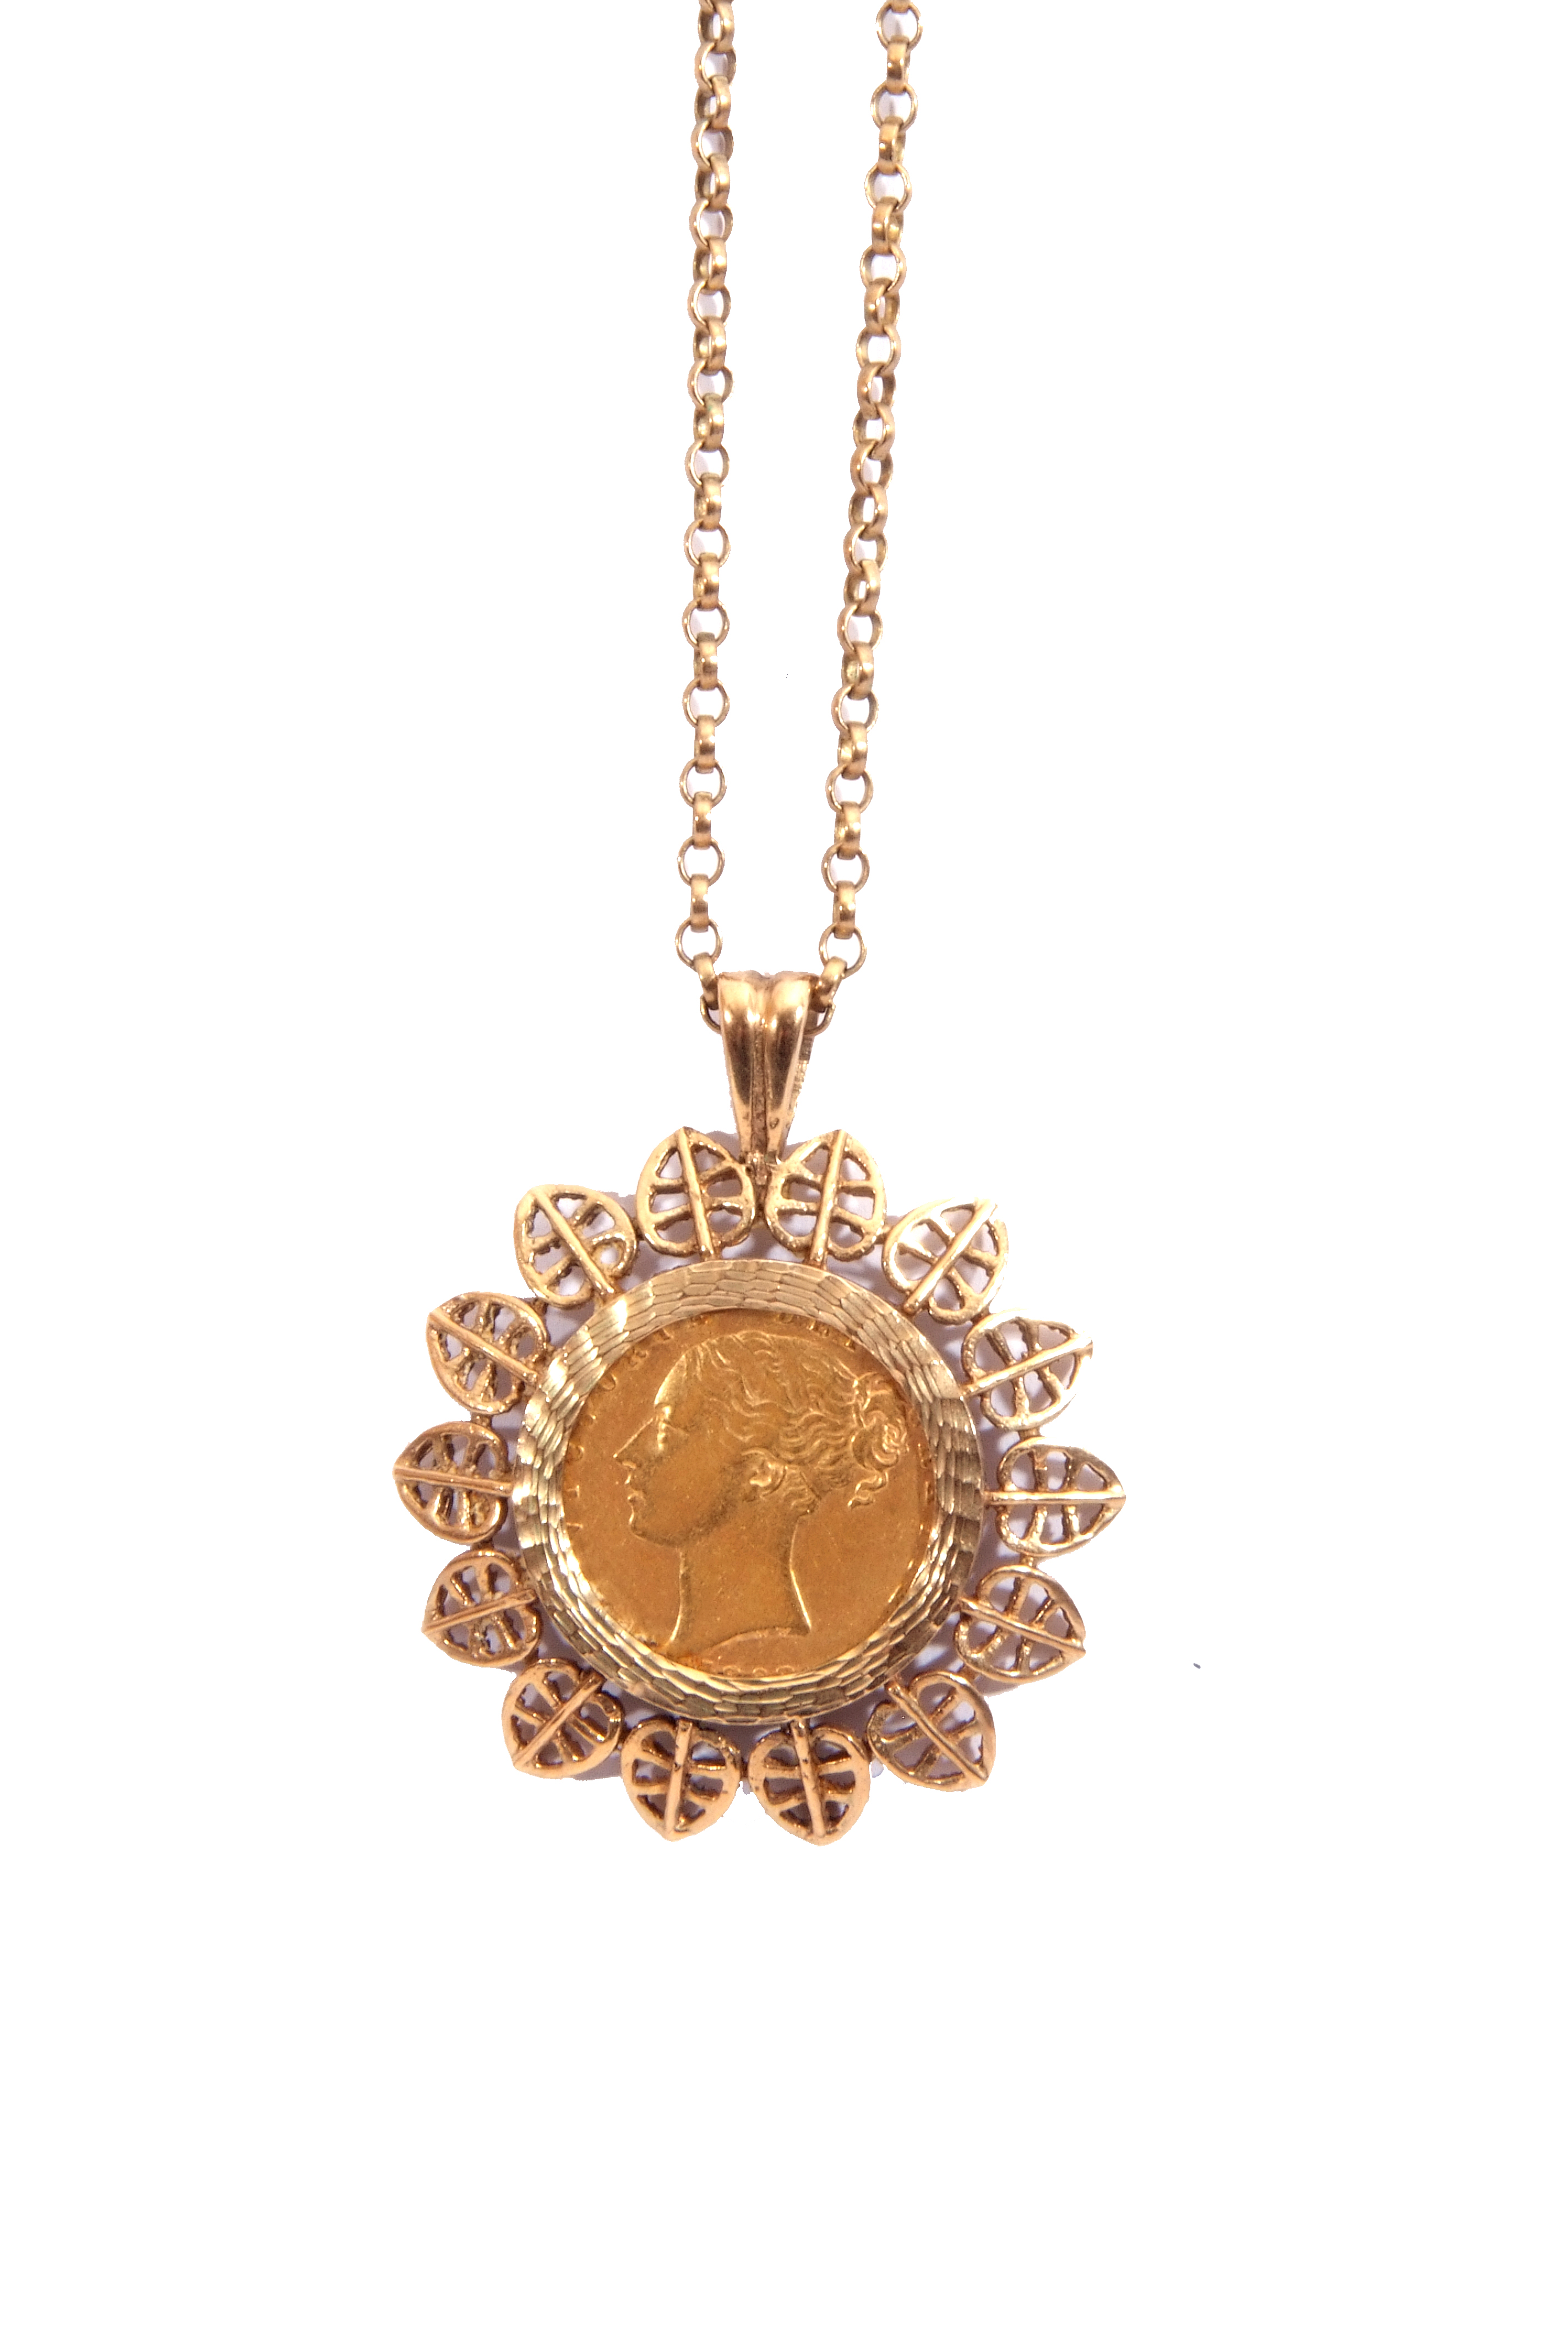 Victorian gold shield back sovereign within a hallmarked 9ct gold filigree leaf edge design pendant, - Image 2 of 4